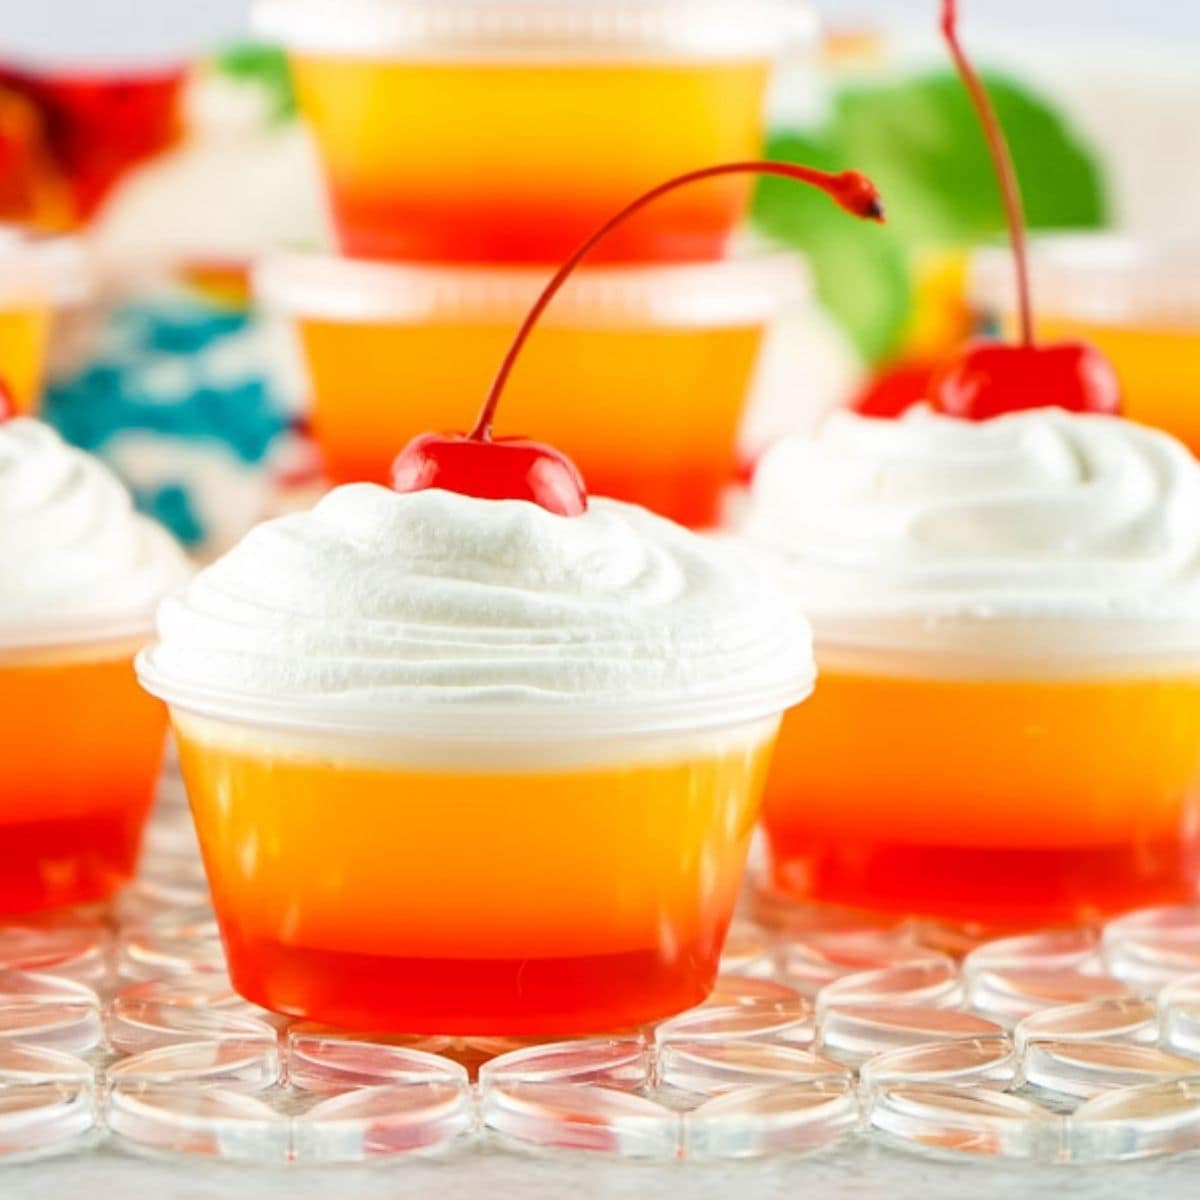 How To Make Vodka Jello Shots (with Video!) - A Beautiful Mess